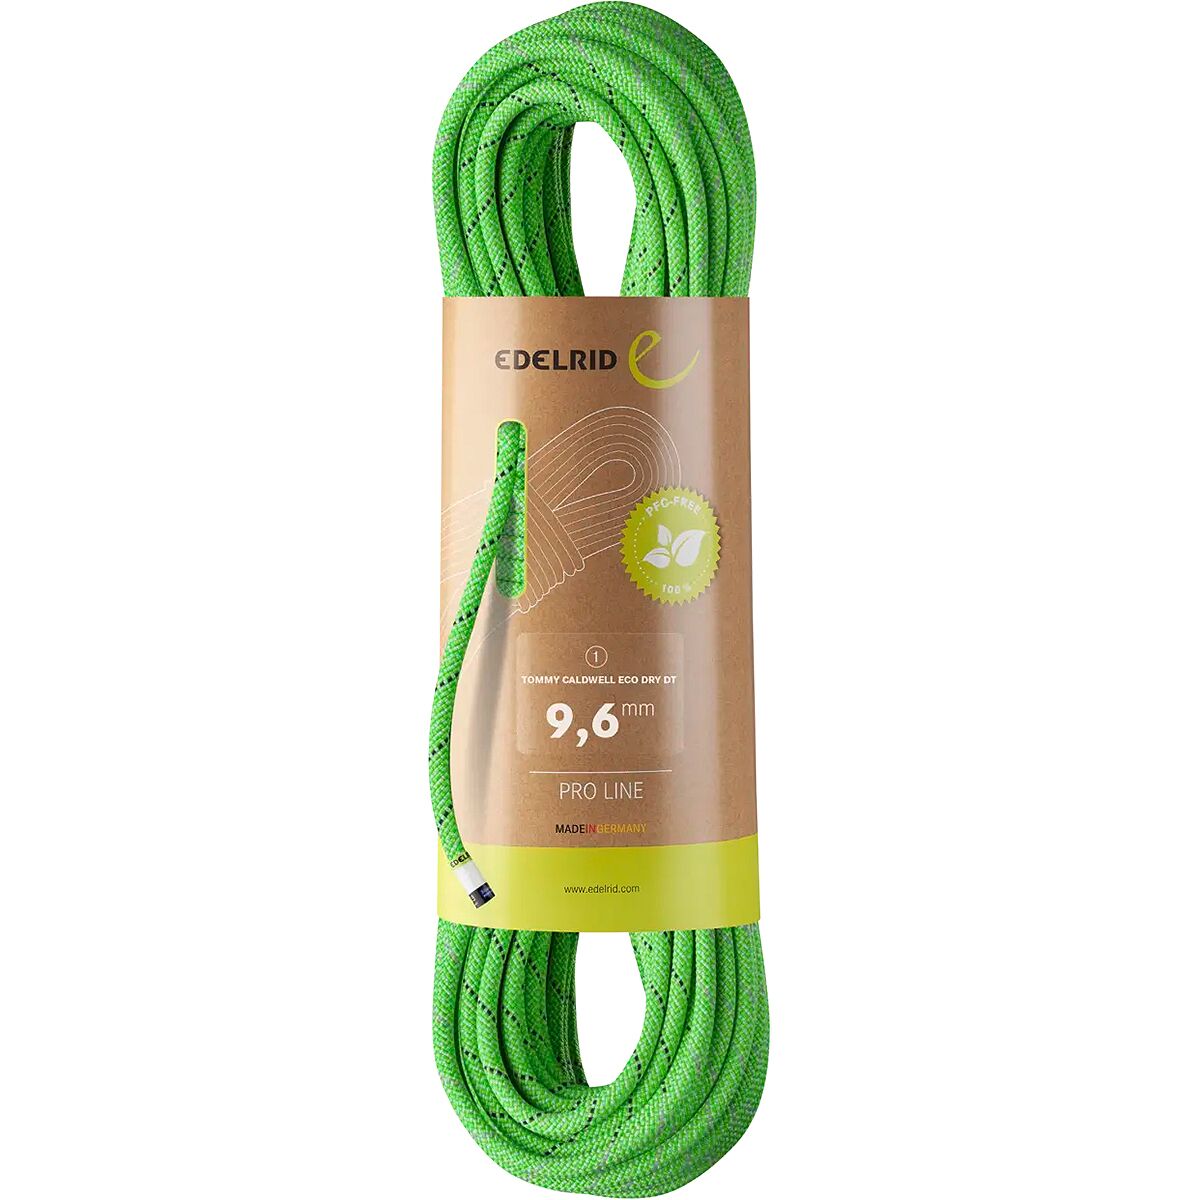 Edelrid Tommy Caldwell Eco Dry DuoTec Climbing Rope - 9.6mm